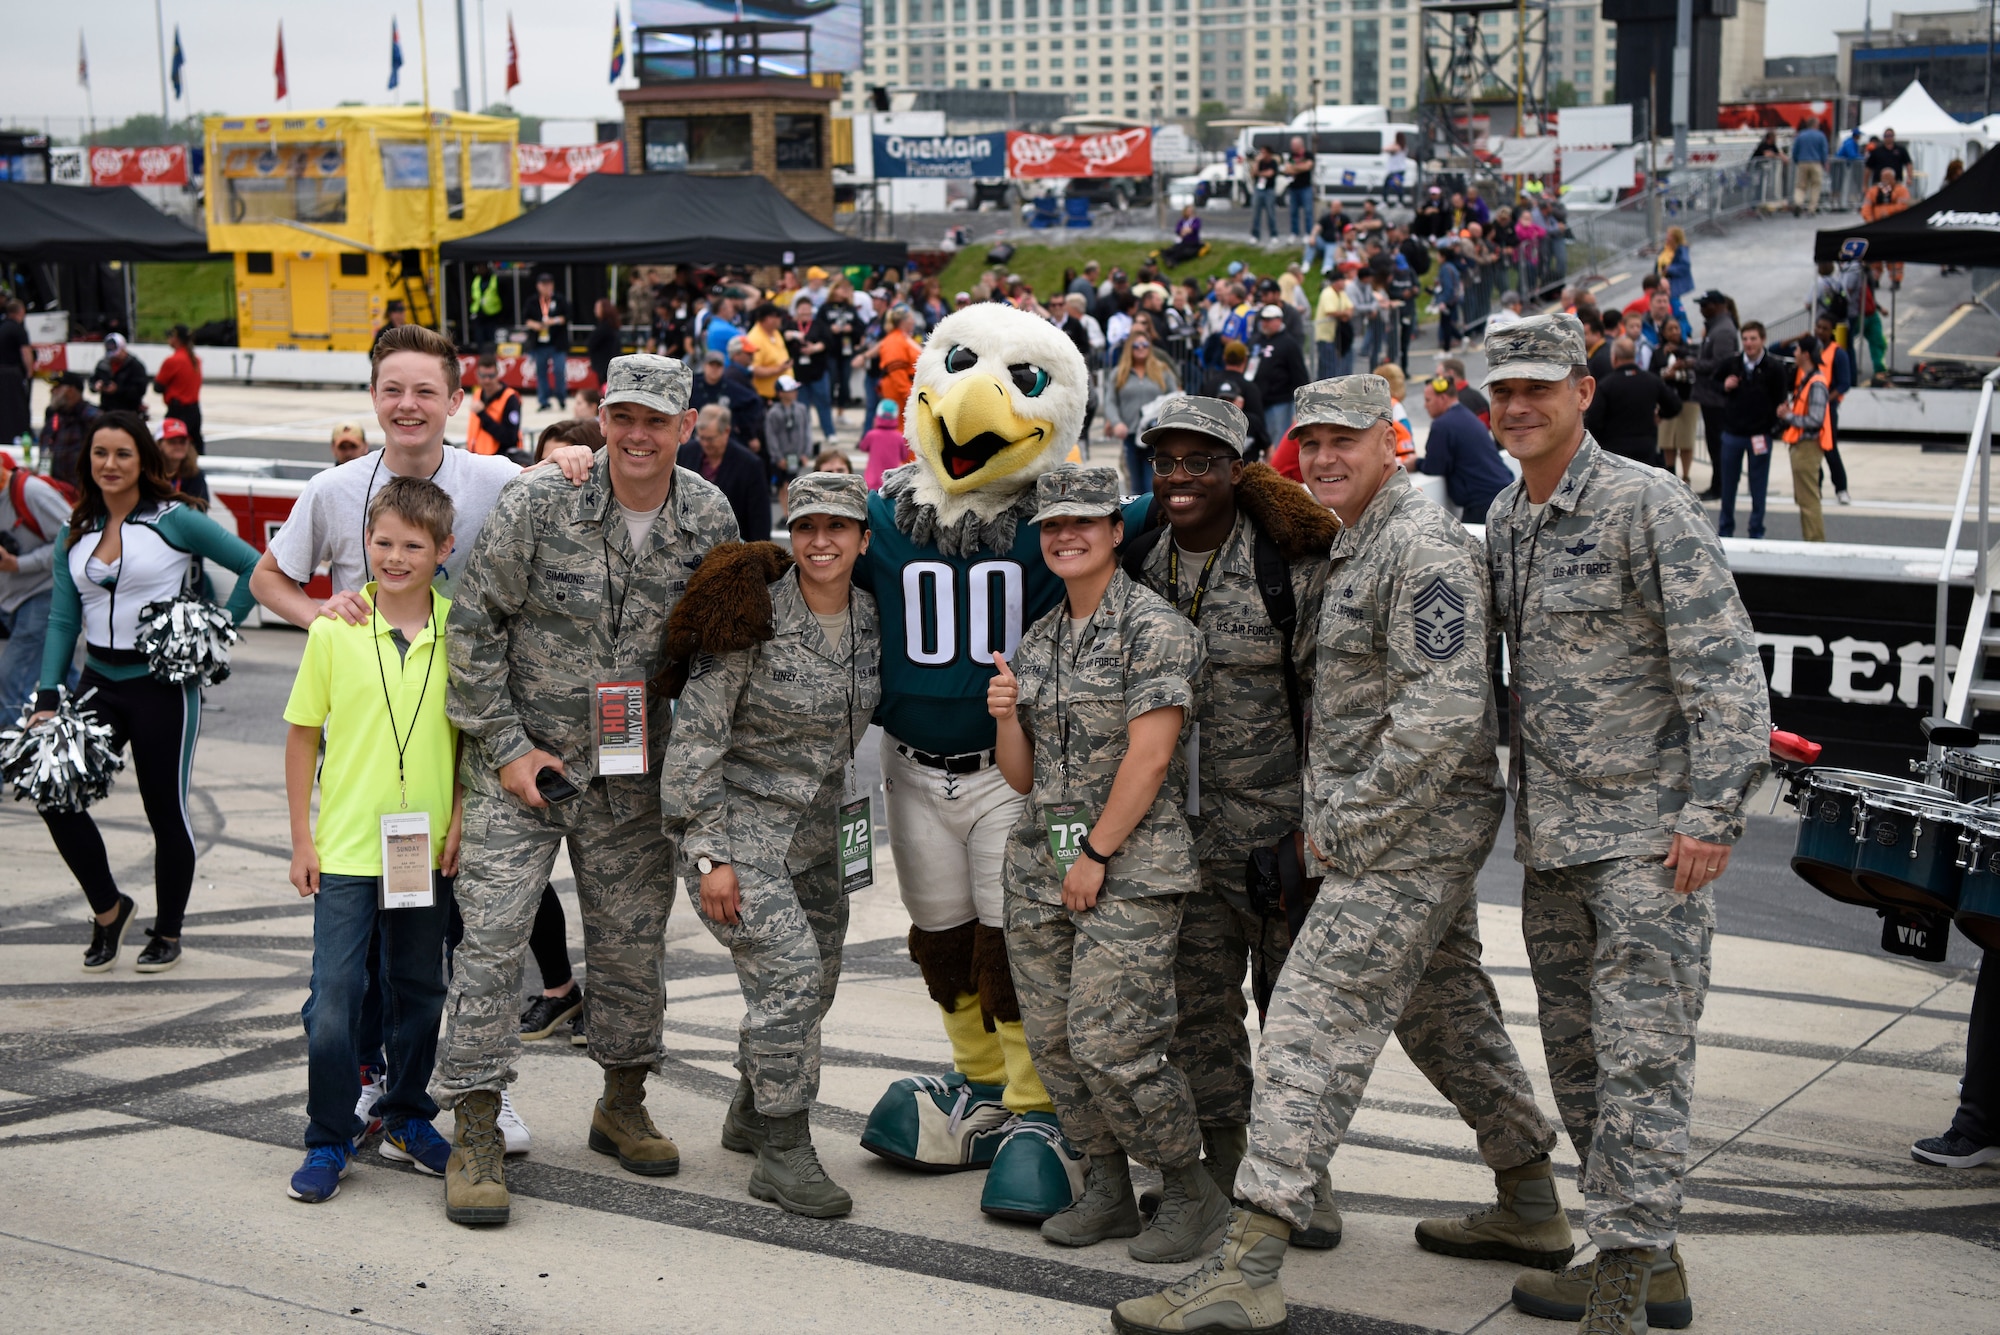 Members from Team Dover get a picture with the Philadelphia Eagles mascot at the “AAA 400 Drive for Autism” Monster Energy NASCAR Cup Series race May 6, 2018 at Dover International Speedway, Del. Players from the Philadelphia Eagles participated in the opening ceremonies prior to the start of the race. (U.S. Air Force photo by Airman 1st Class Zoe M. Wockenfuss)